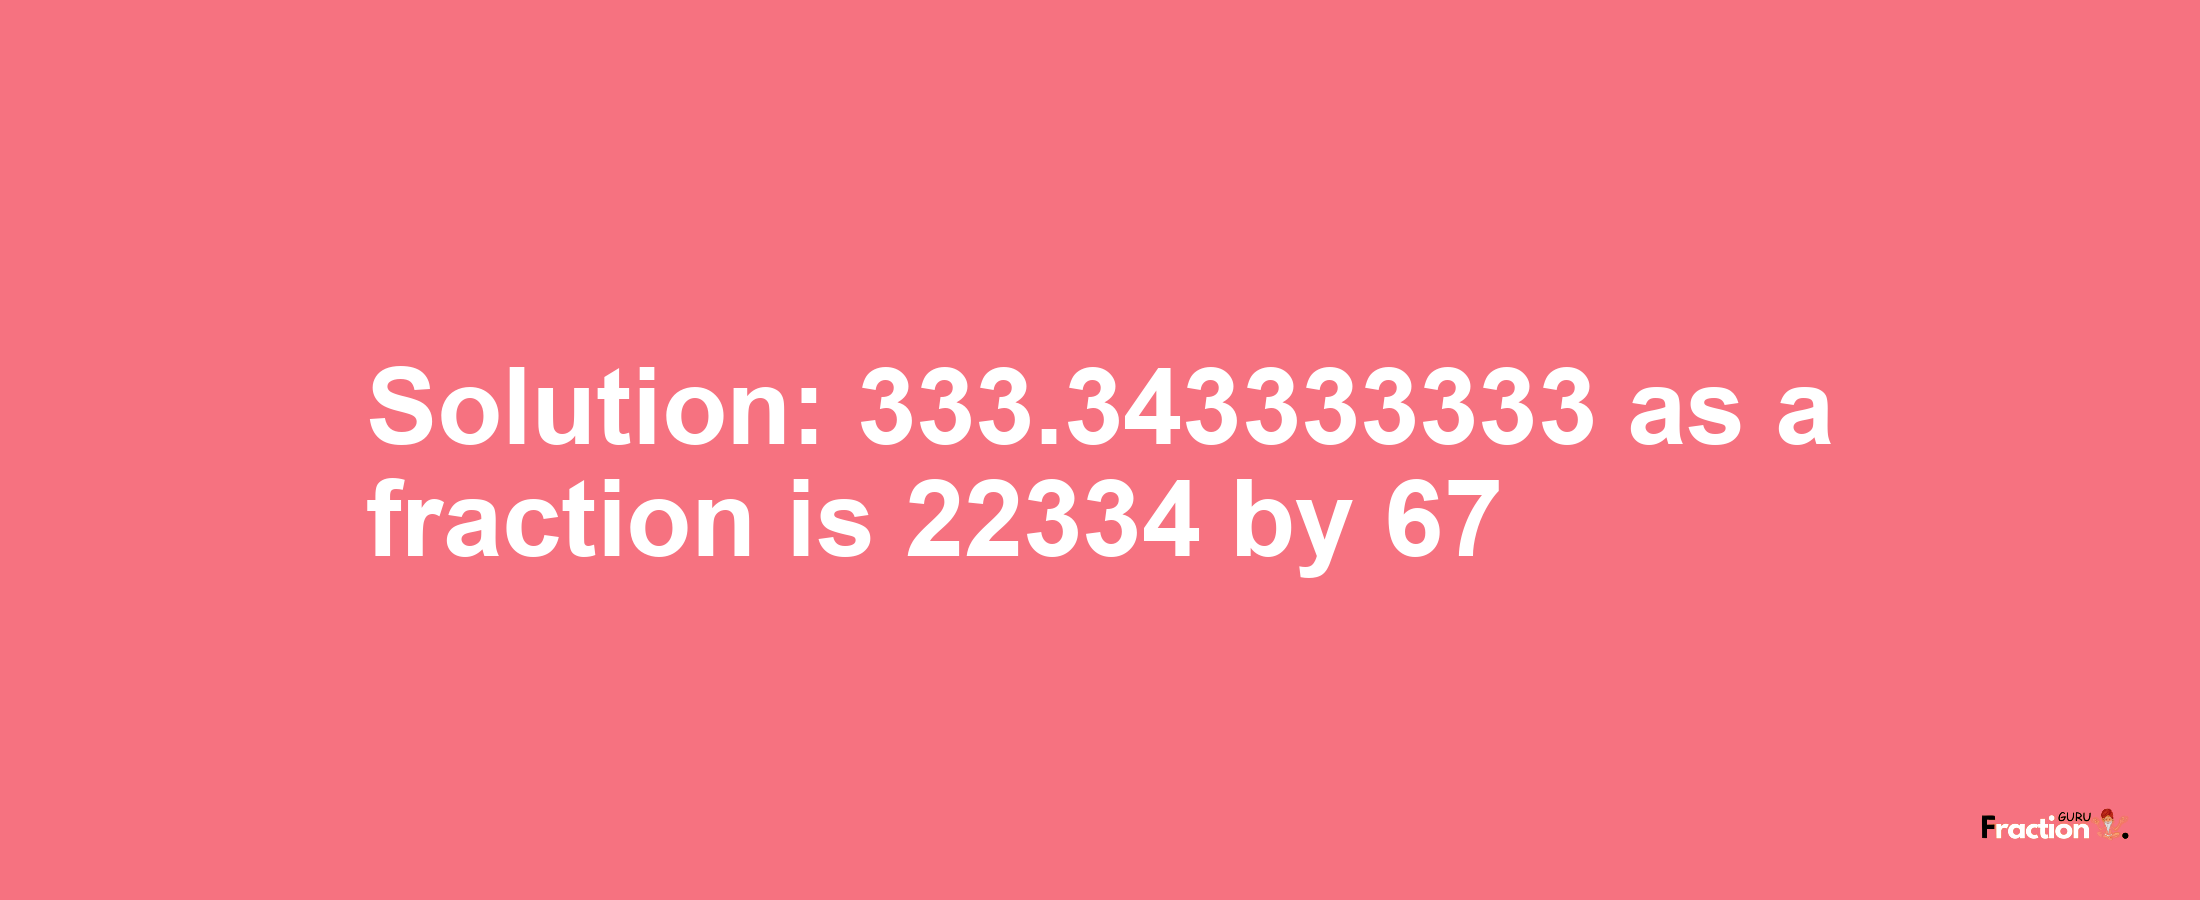 Solution:333.343333333 as a fraction is 22334/67